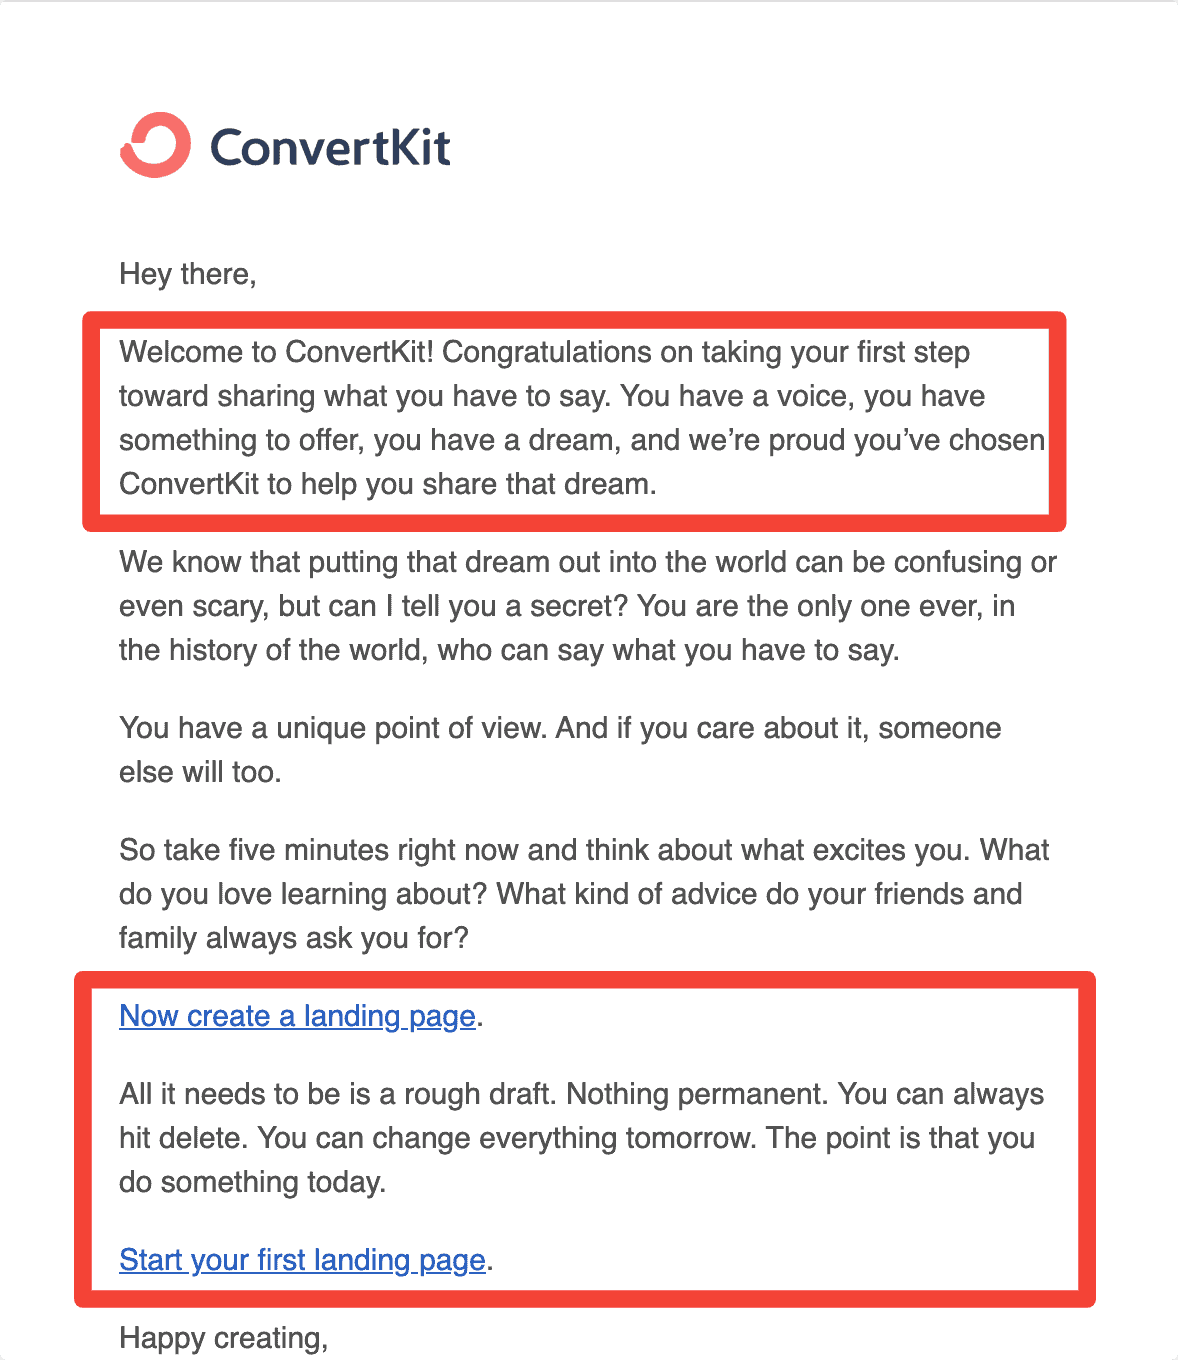 email by ConvertKit